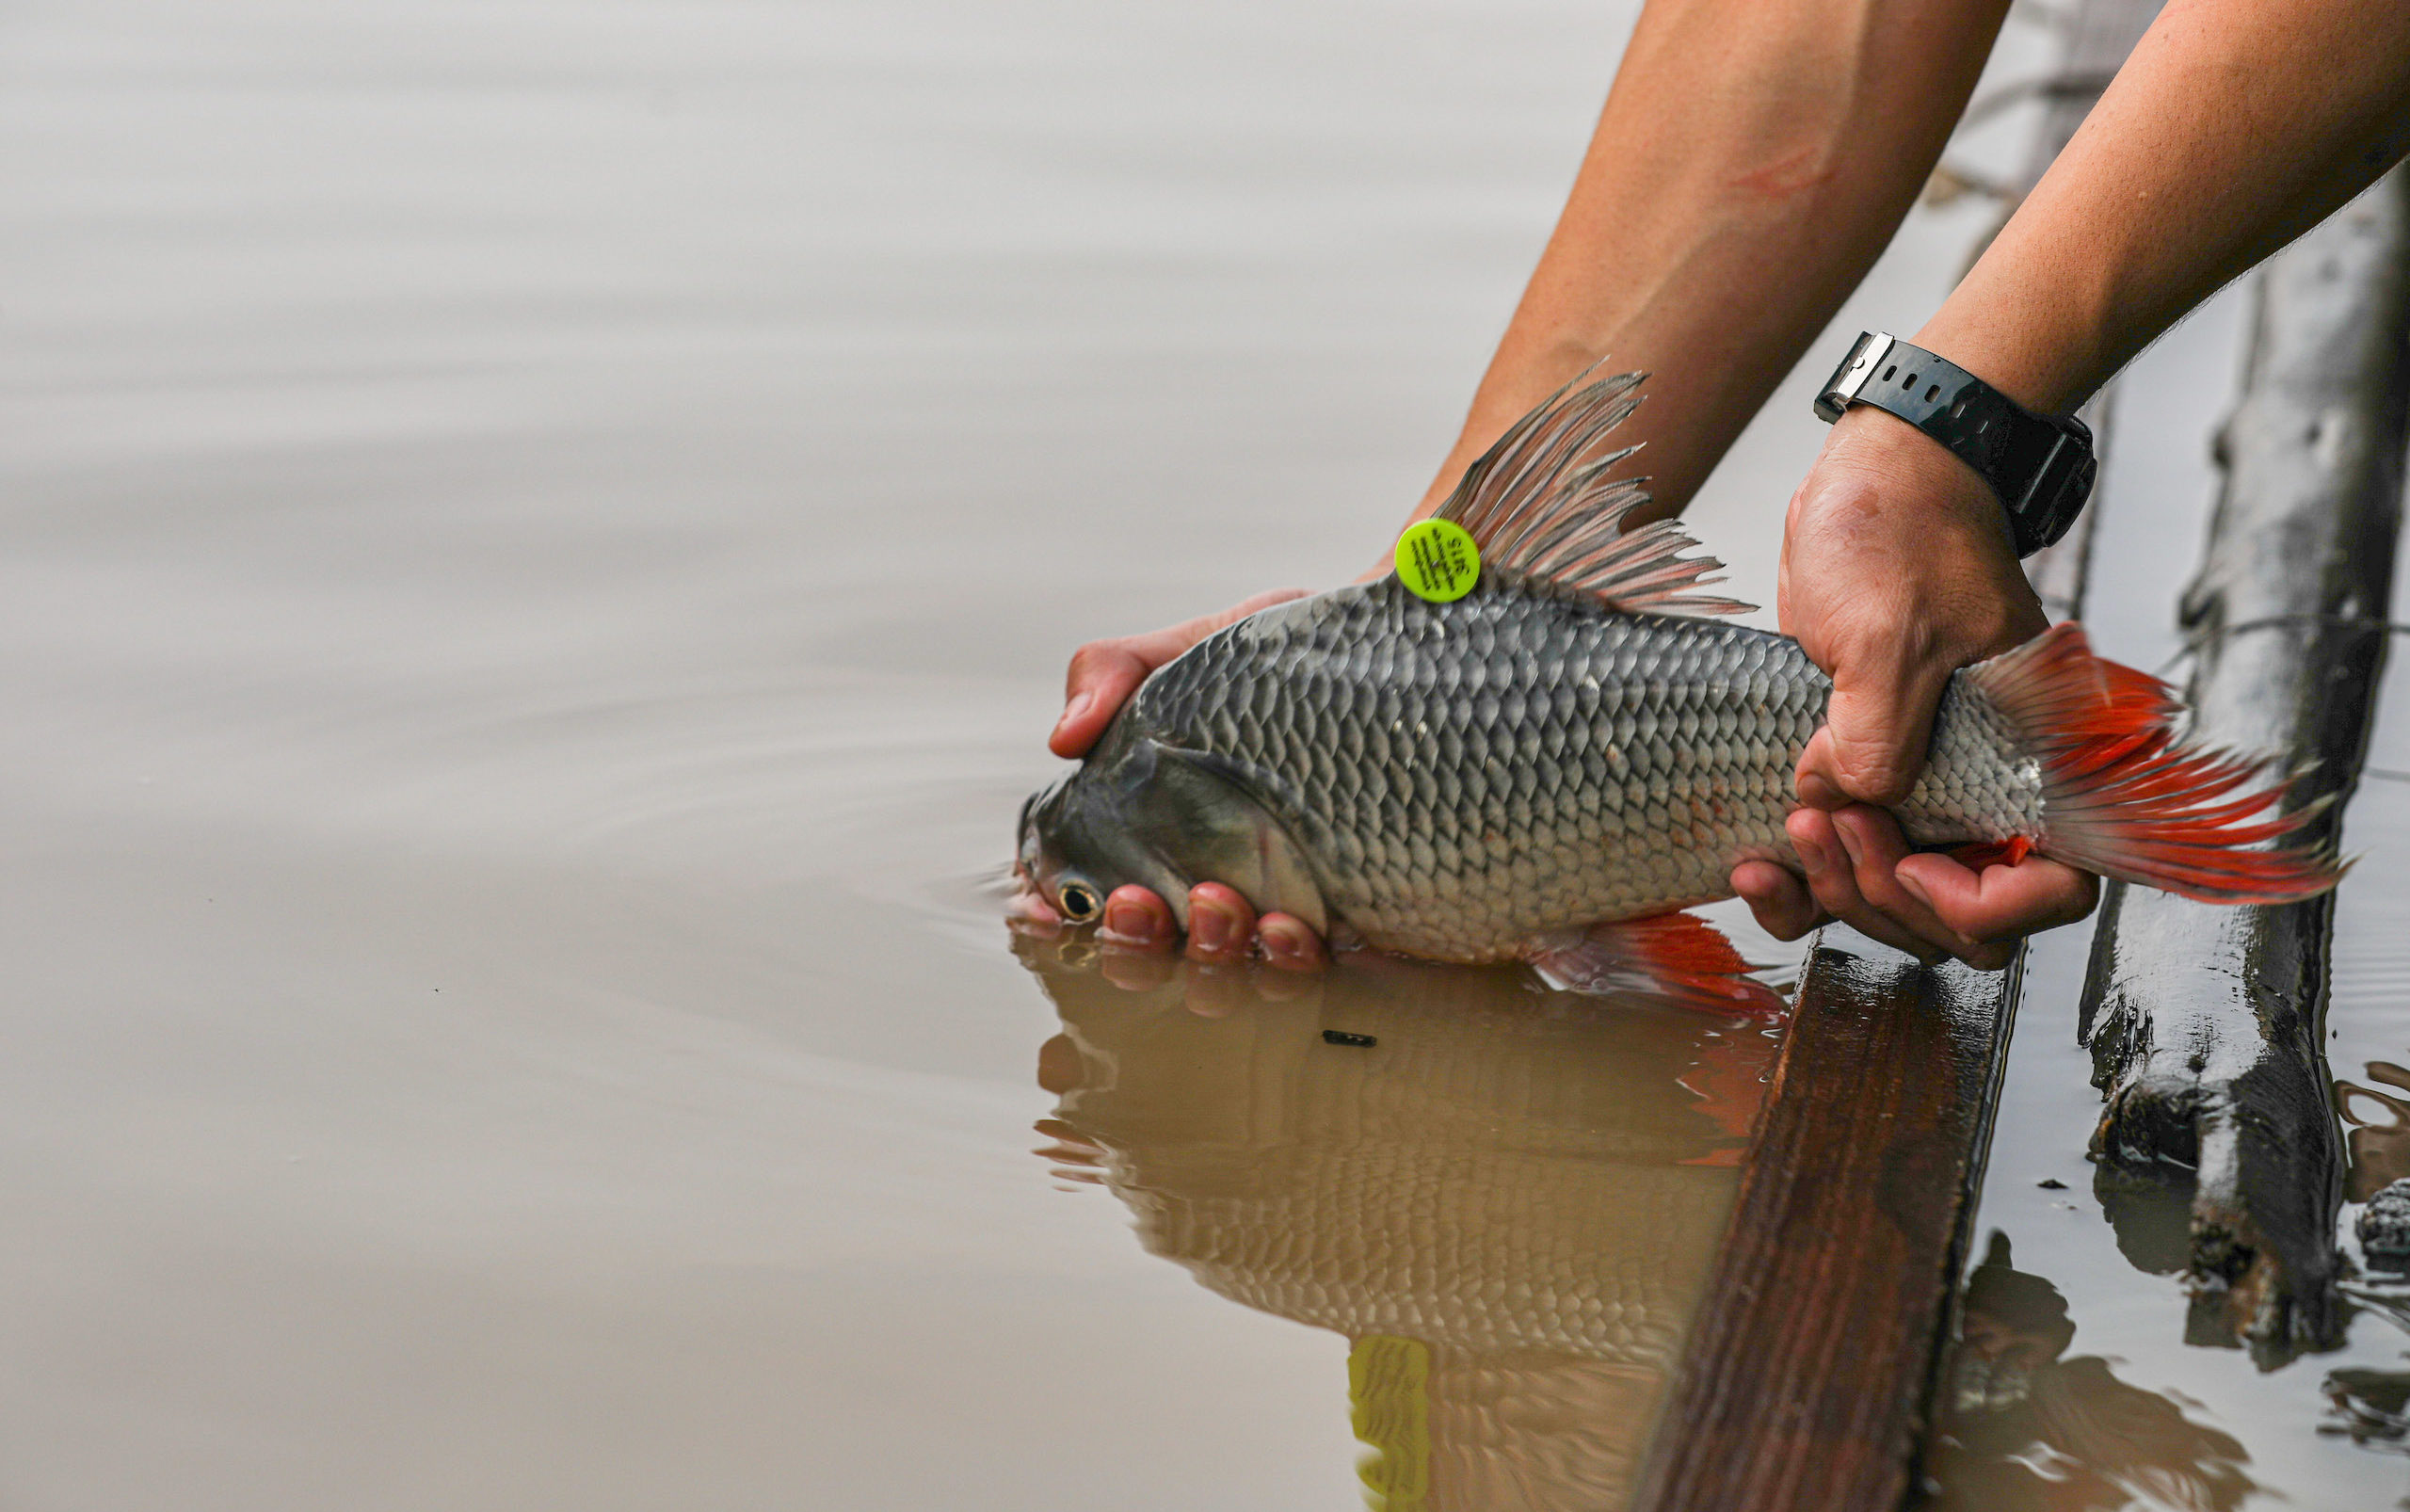 largest ever fish release on Tonle Sap Lake